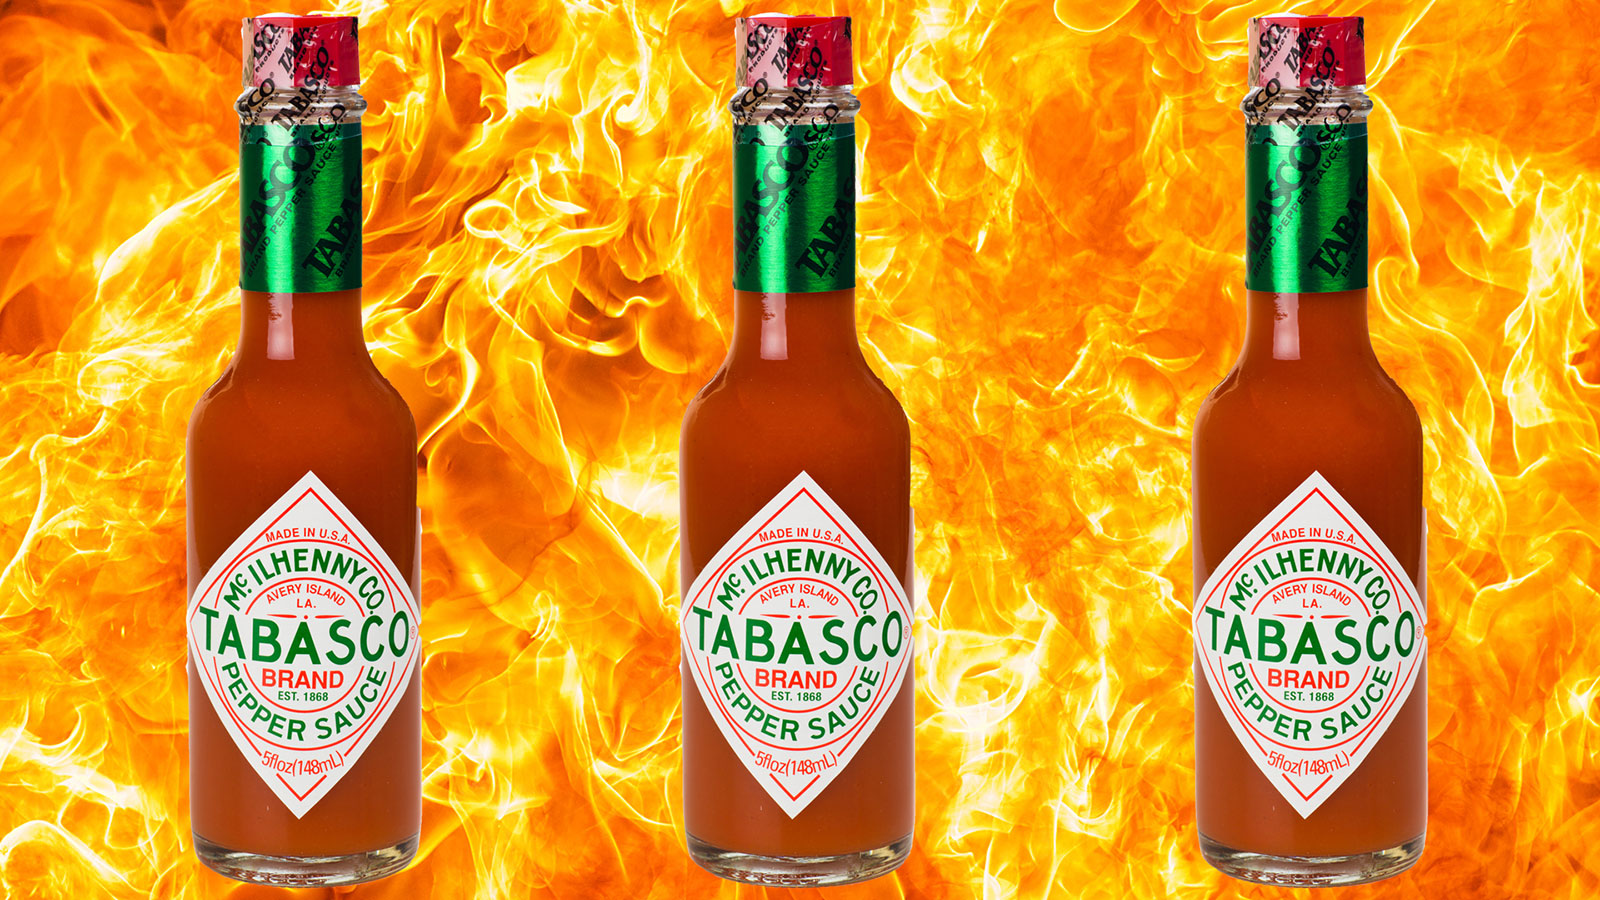 🌶 Only a Person Who Can Handle the Heat Will Have Eaten 13/25 of These Spicy Foods Tabasco Sauce